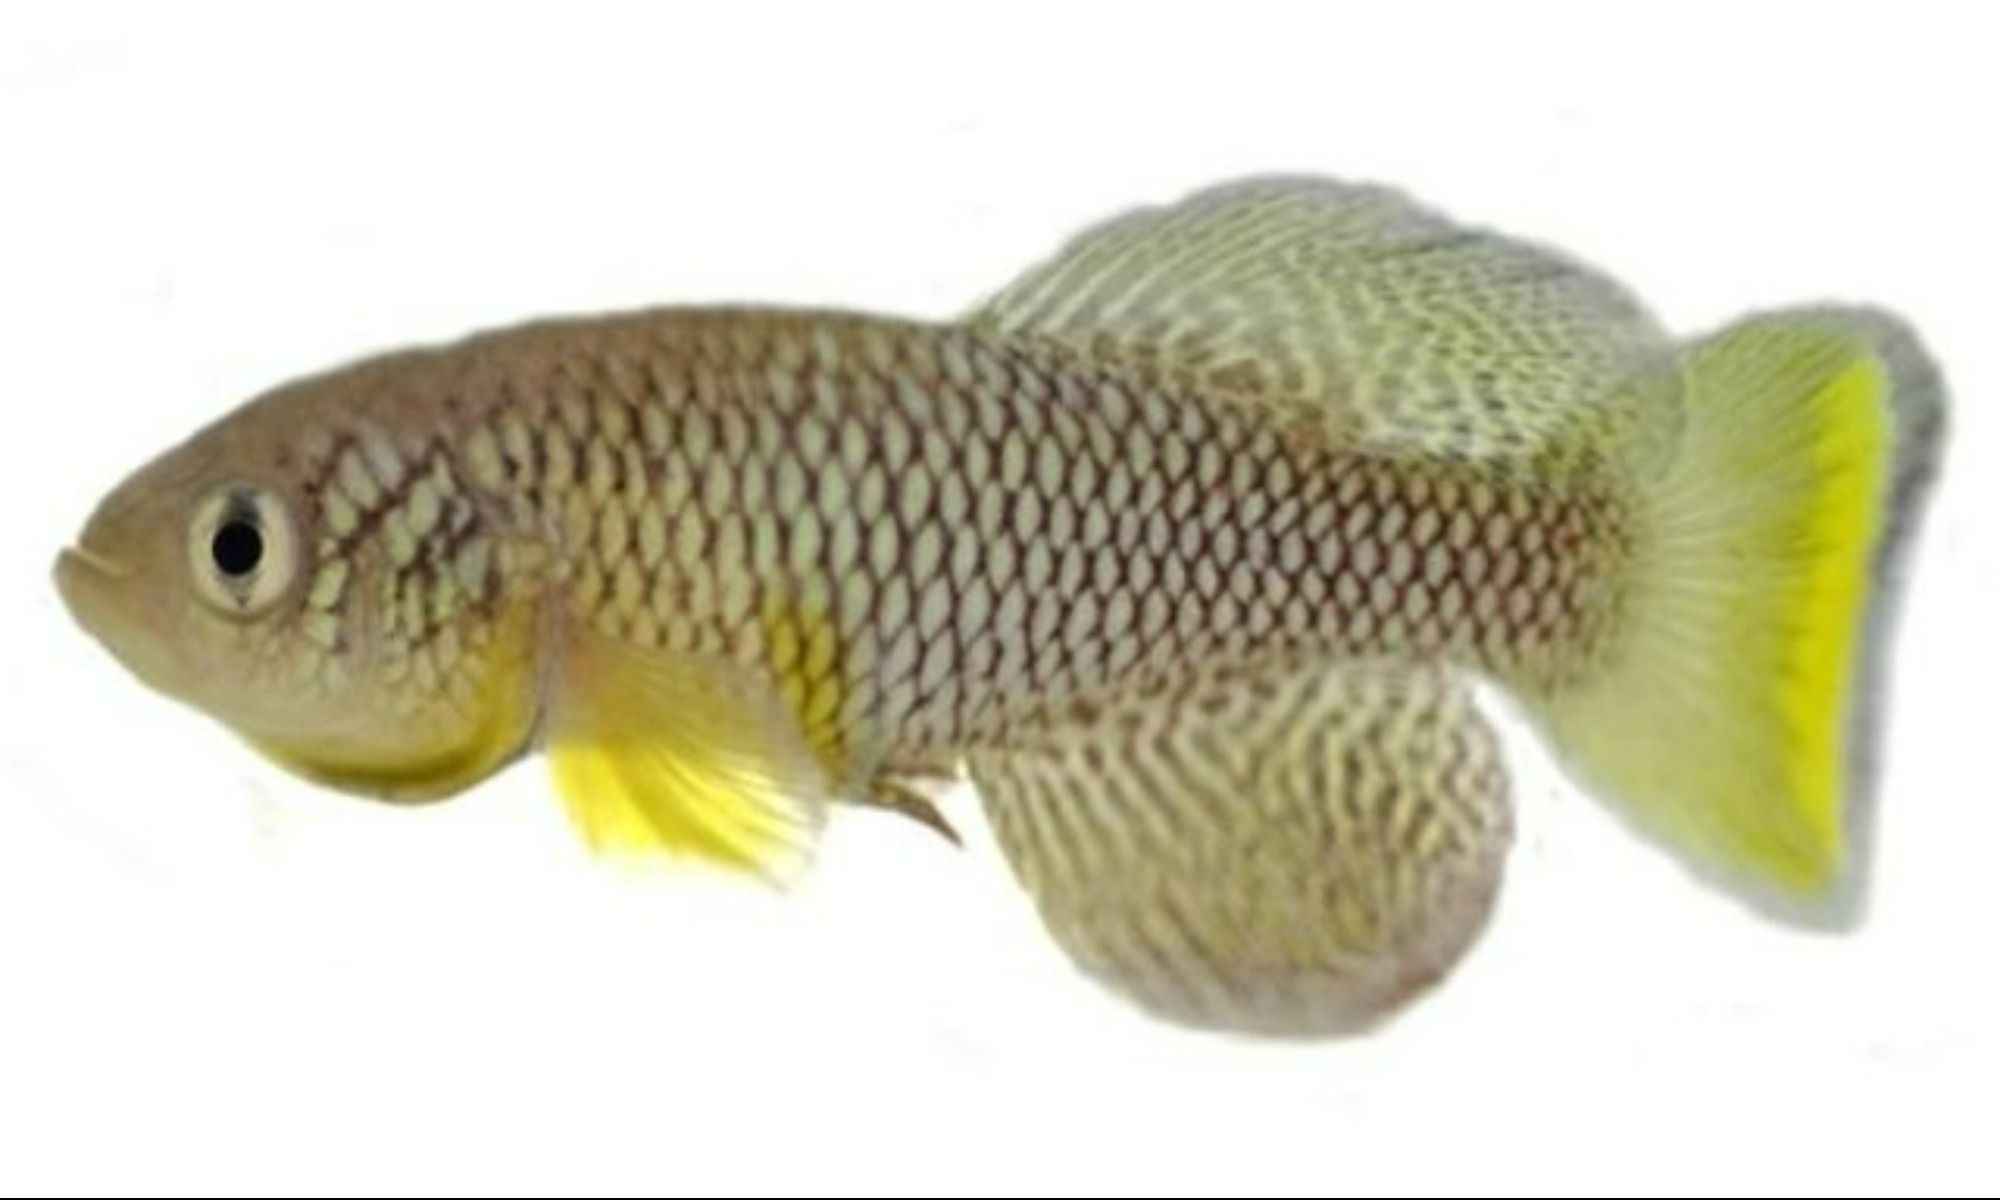 Can African Turquoise Killifish Stop Human Aging?